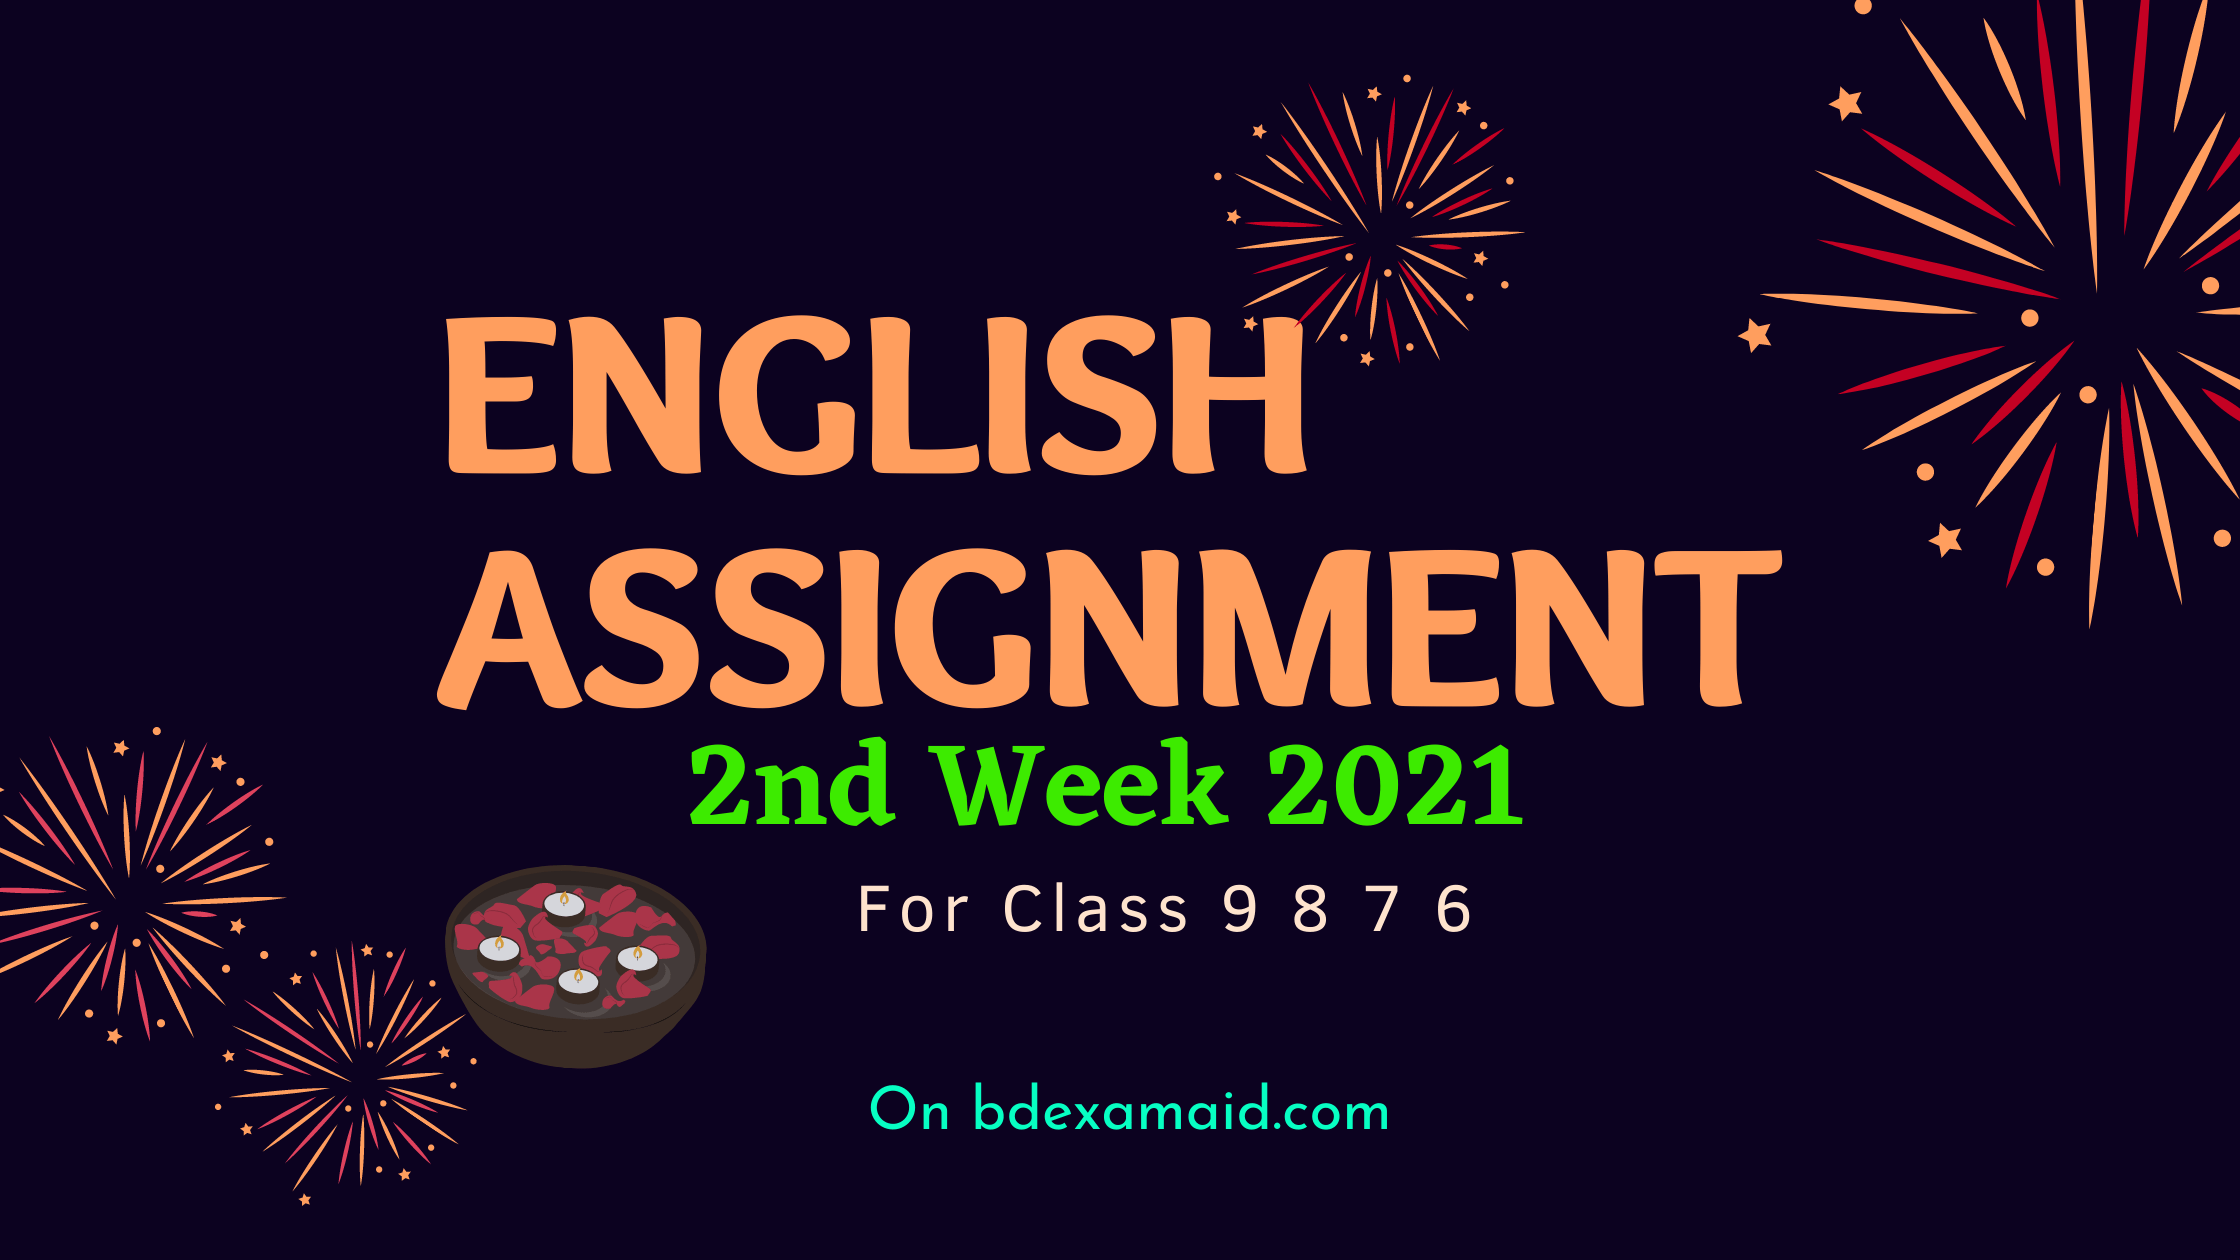 2nd week English assignment 2021t